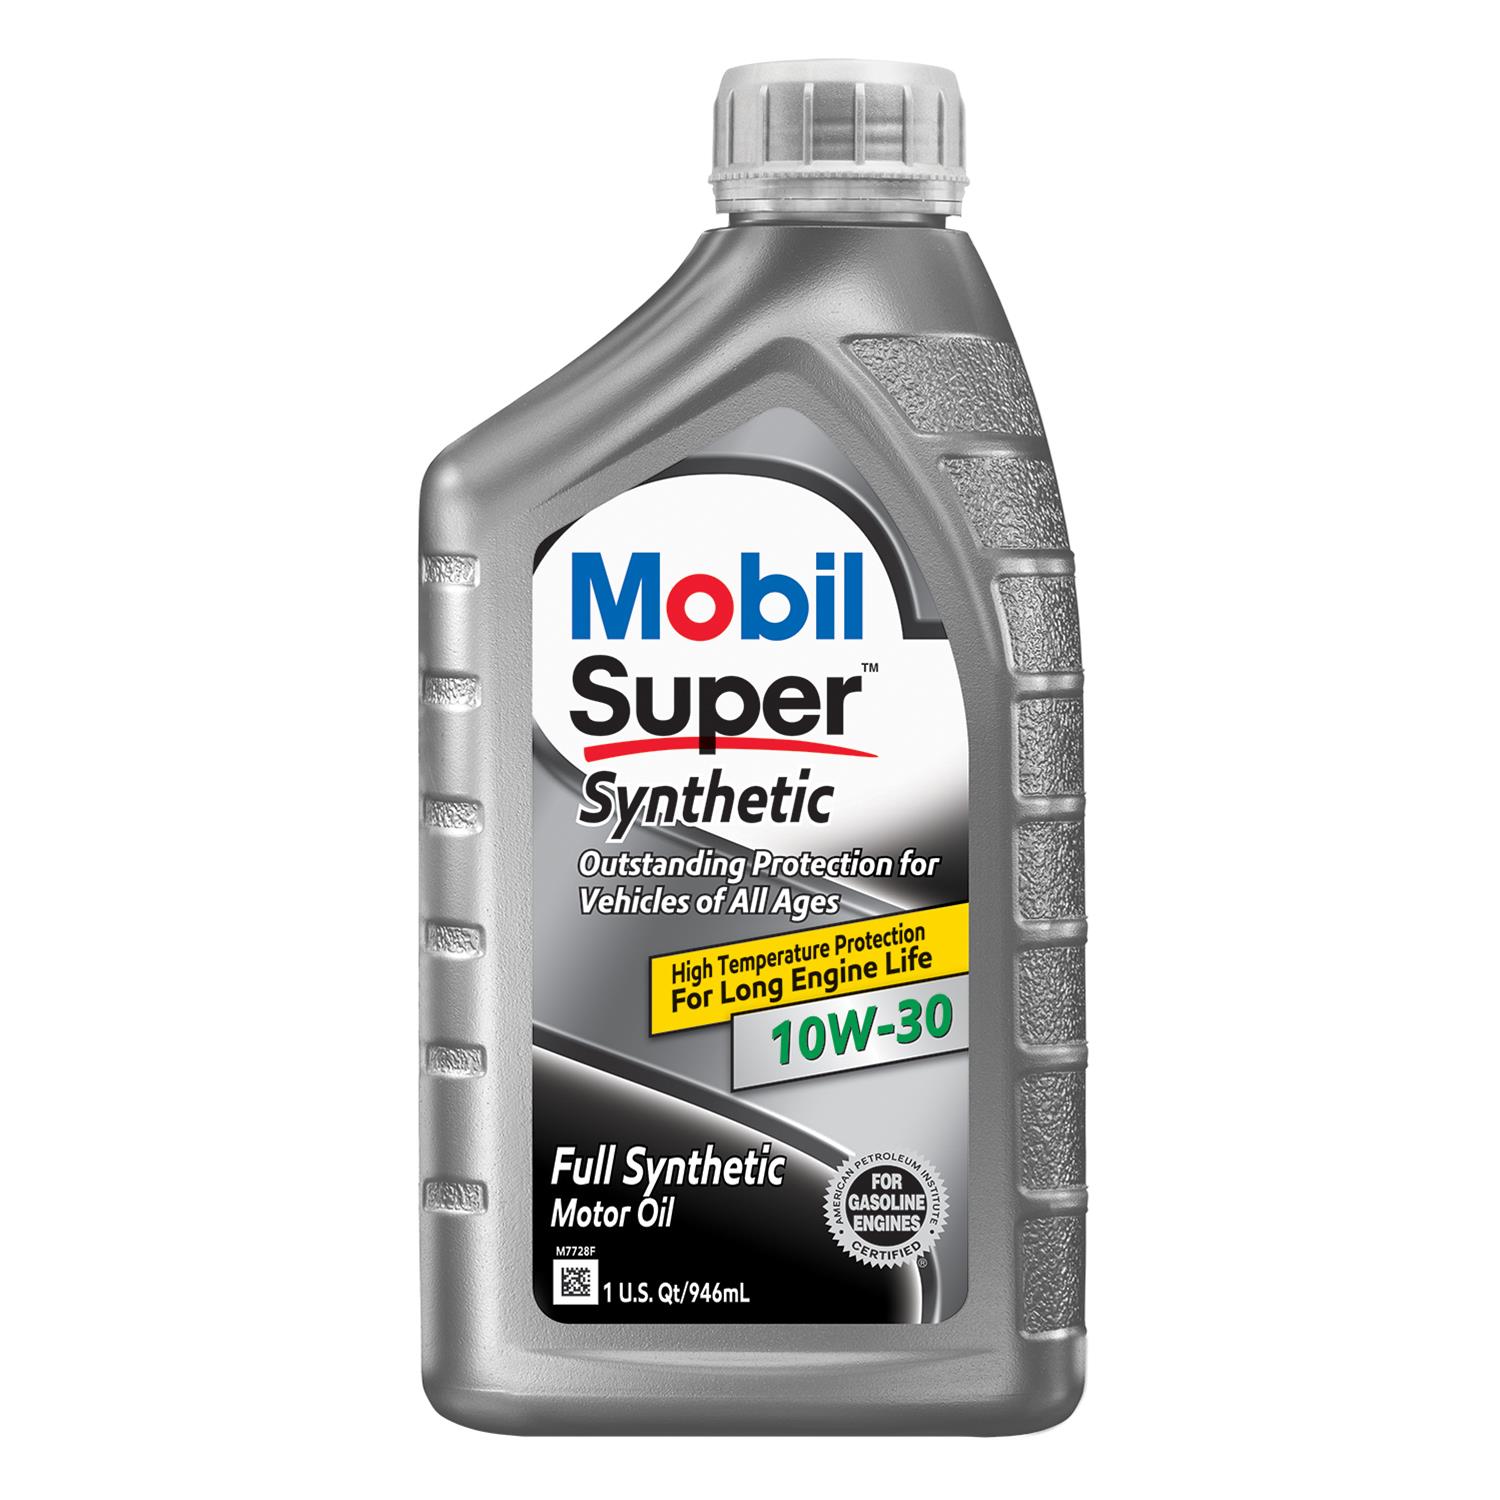 Super Synthetic Oil 10W-30